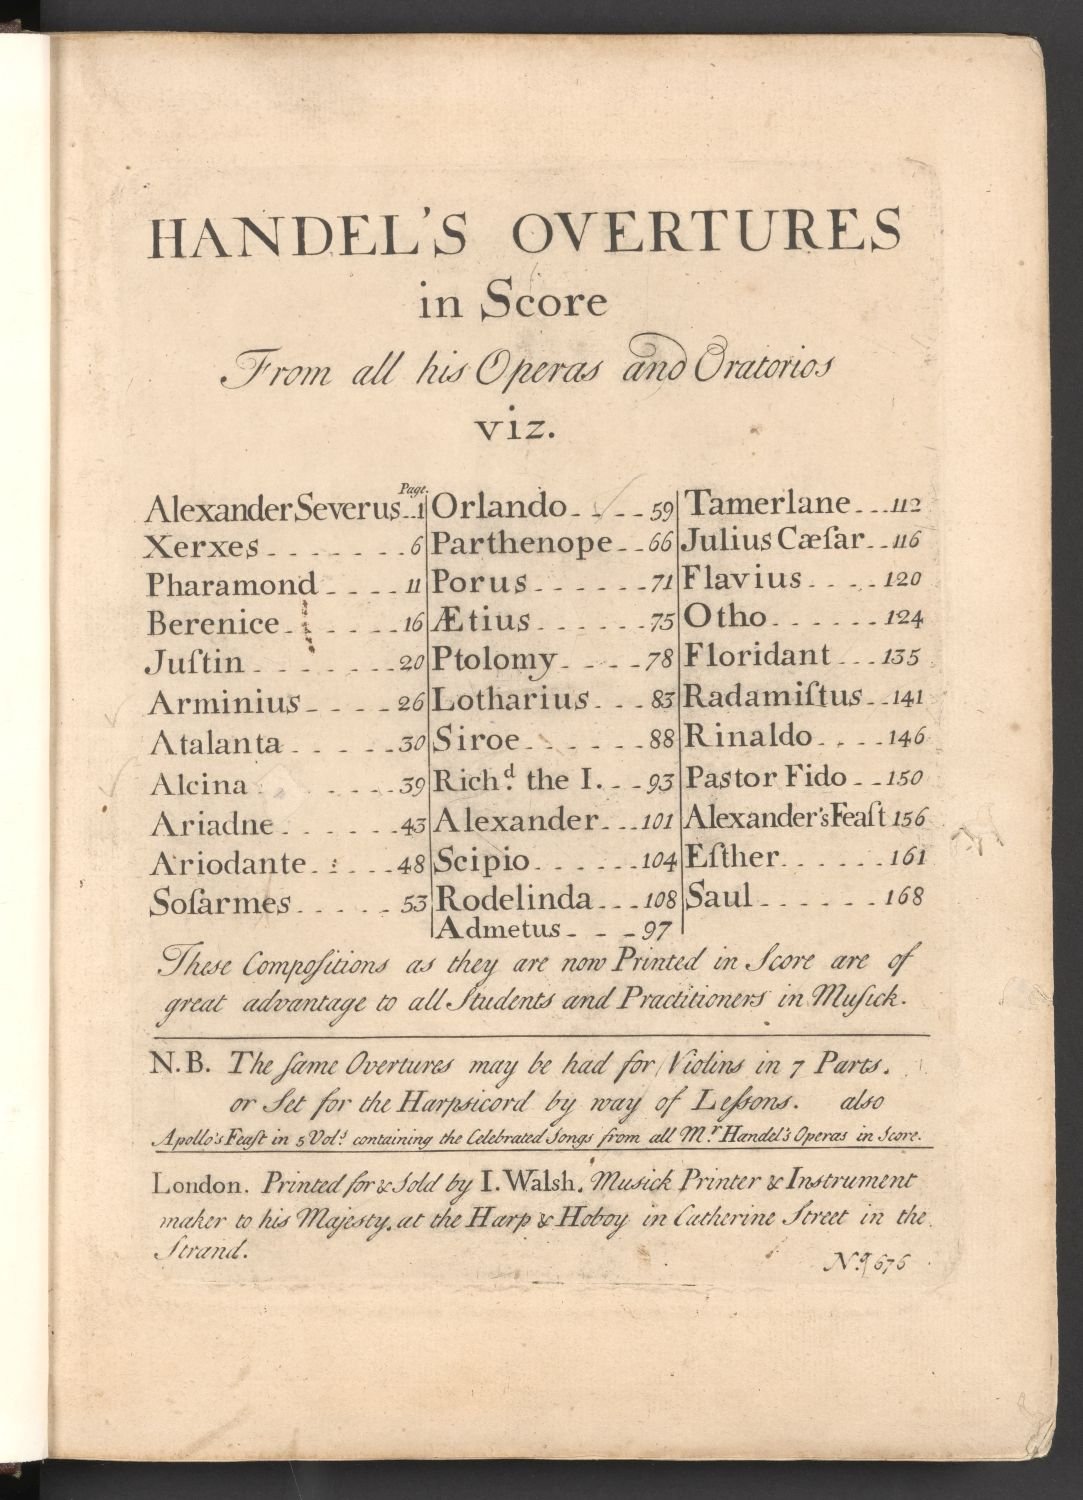 Handel's Overtures in score from all his operas and oratorios (Stiftung Händel-Haus CC BY-NC-SA)